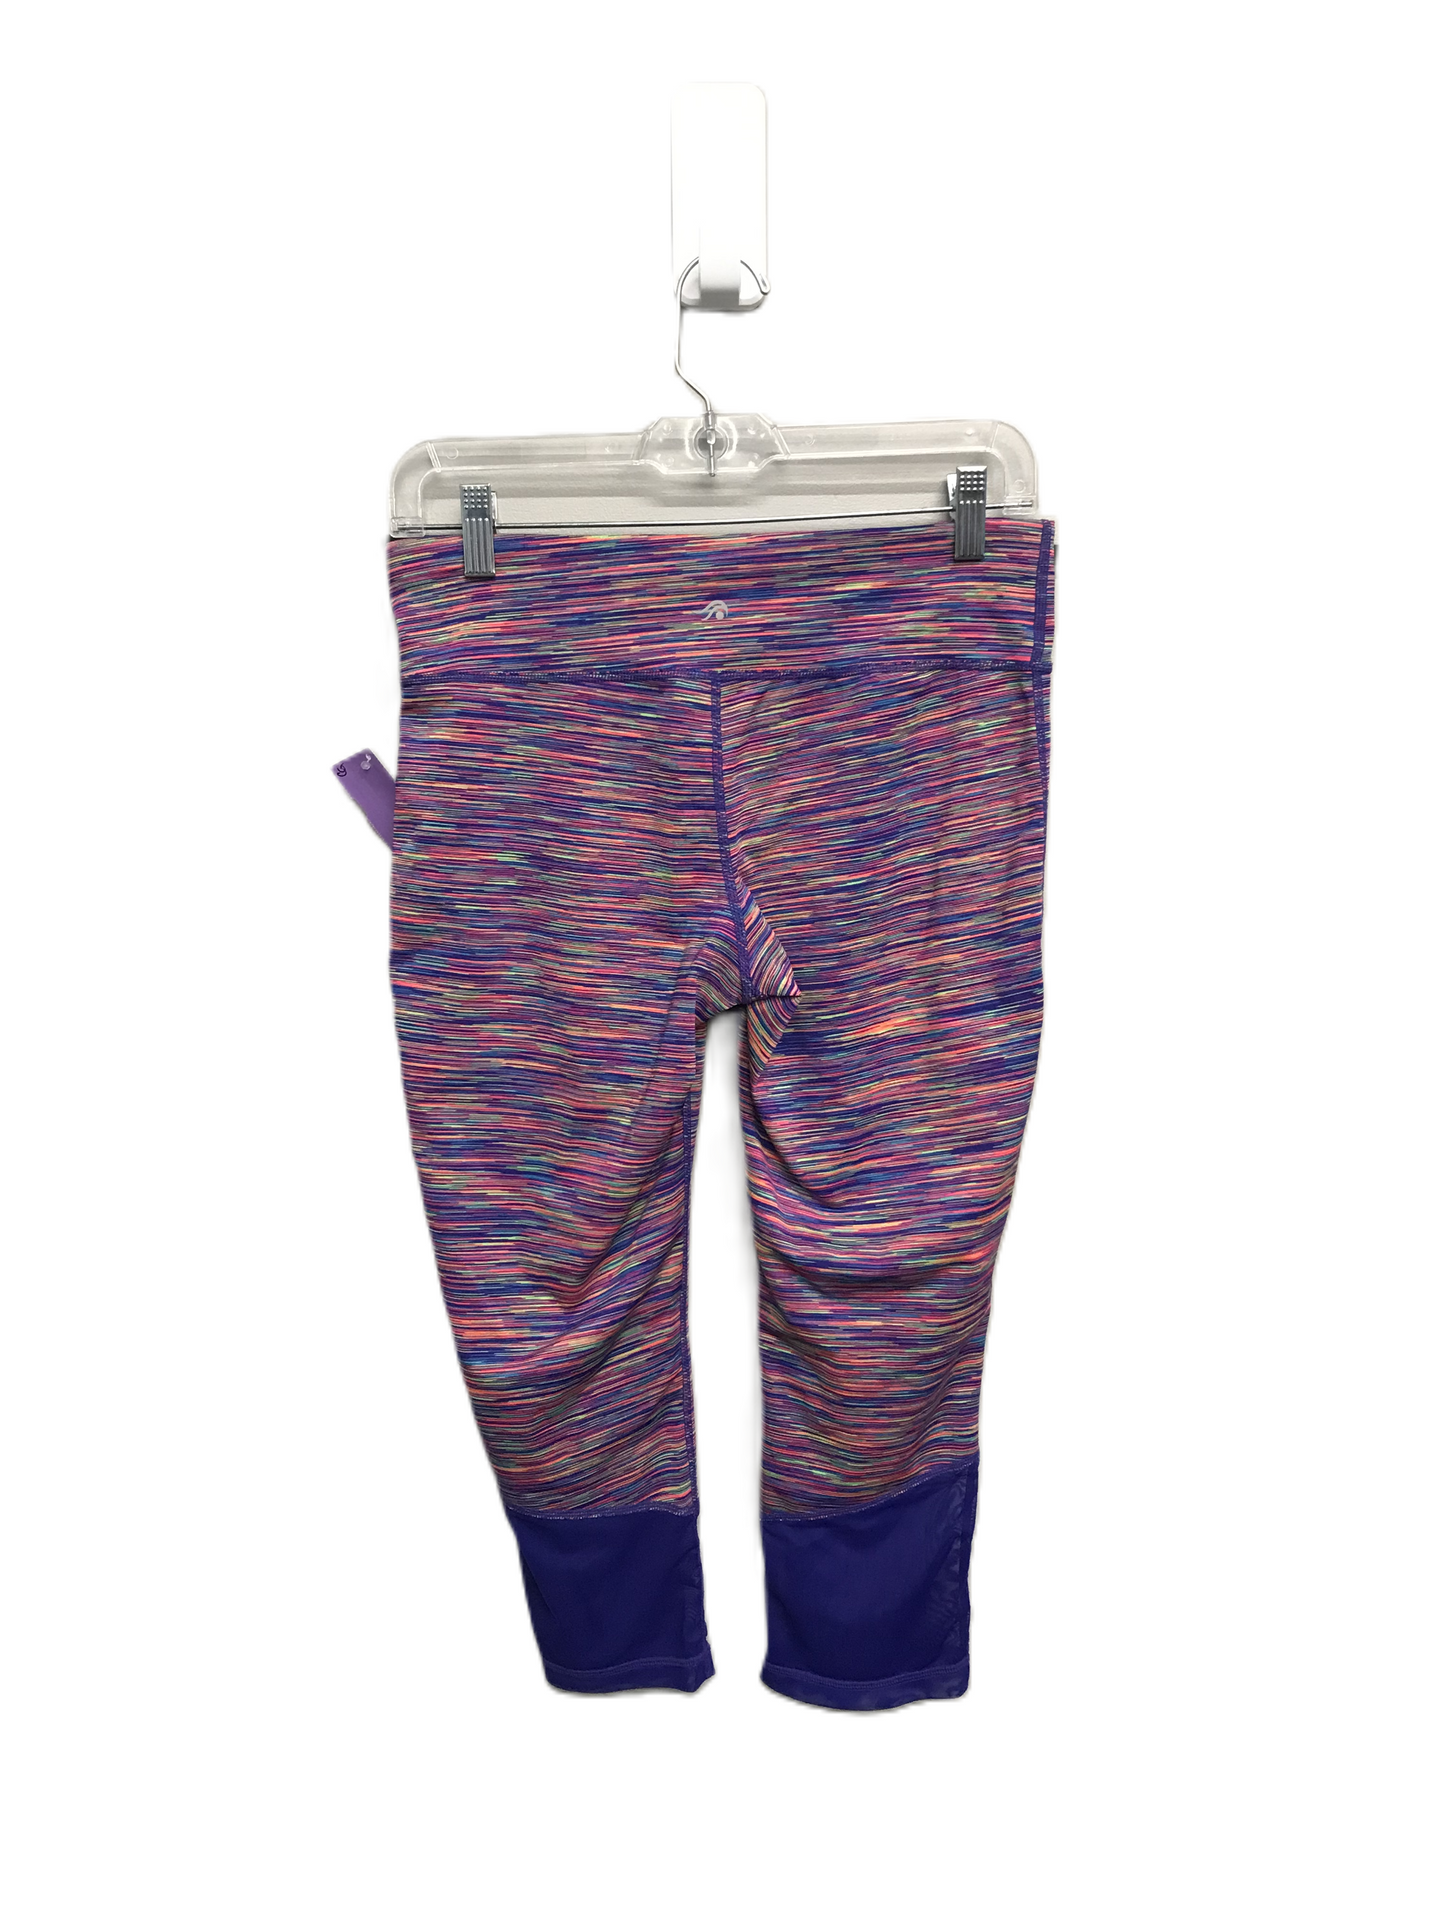 Multi-colored Athletic Leggings By Ideology, Size: M